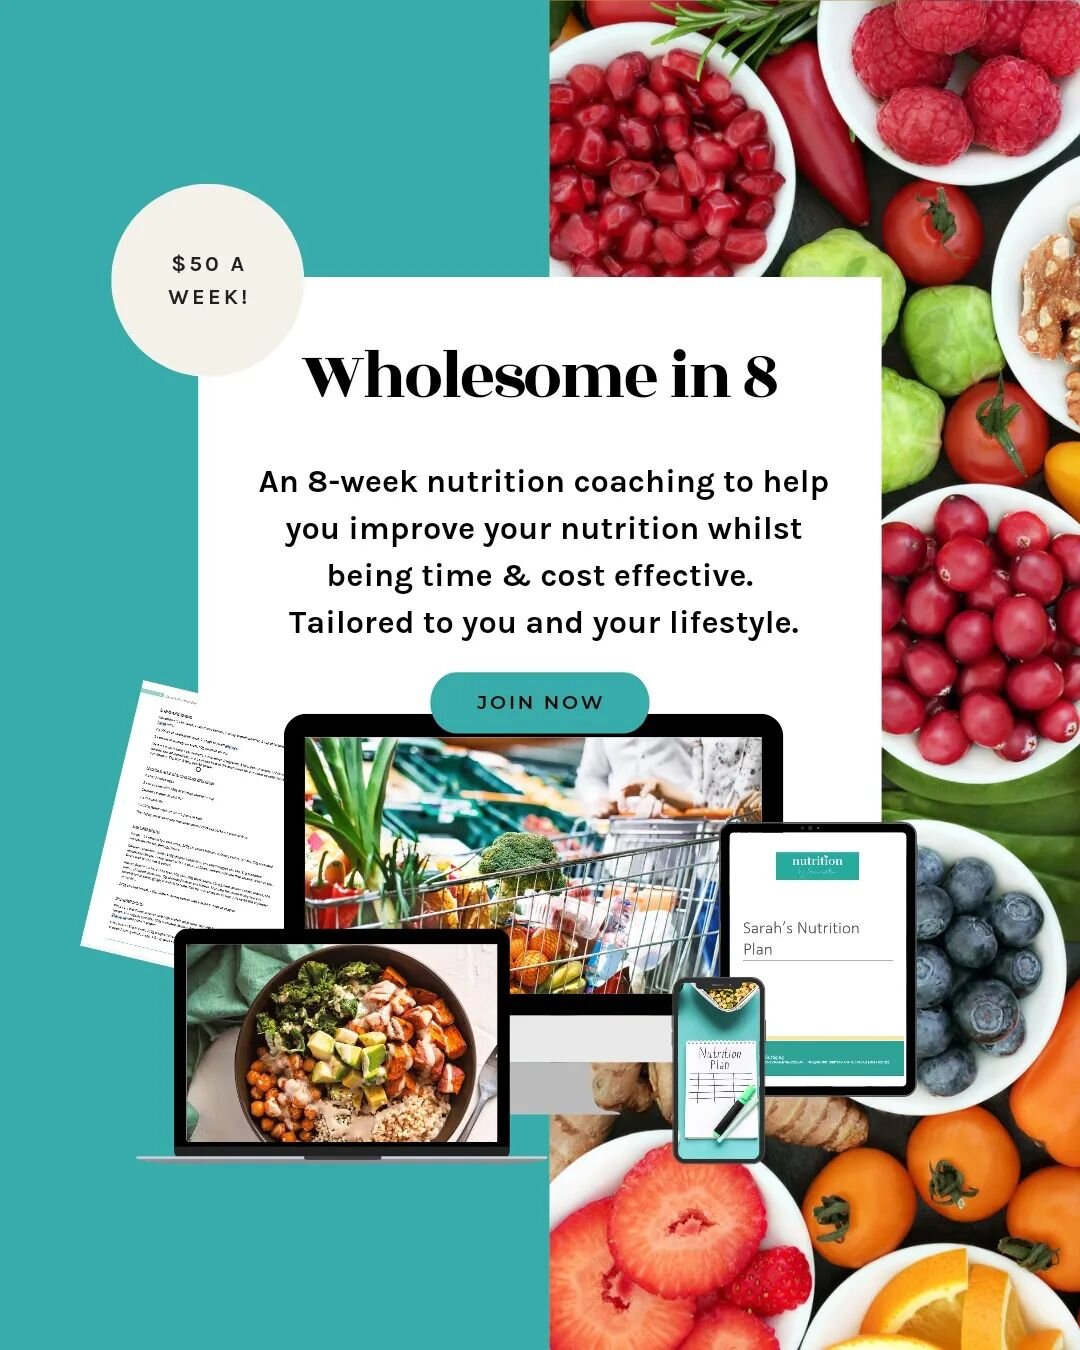 My newest program wholesome in 8!

This is my brand new 8 week program designed to help show you just how easy it can be to create consistent healthy habits and have nutritionist approved meals for you and the family to enjoy without breaking the ban